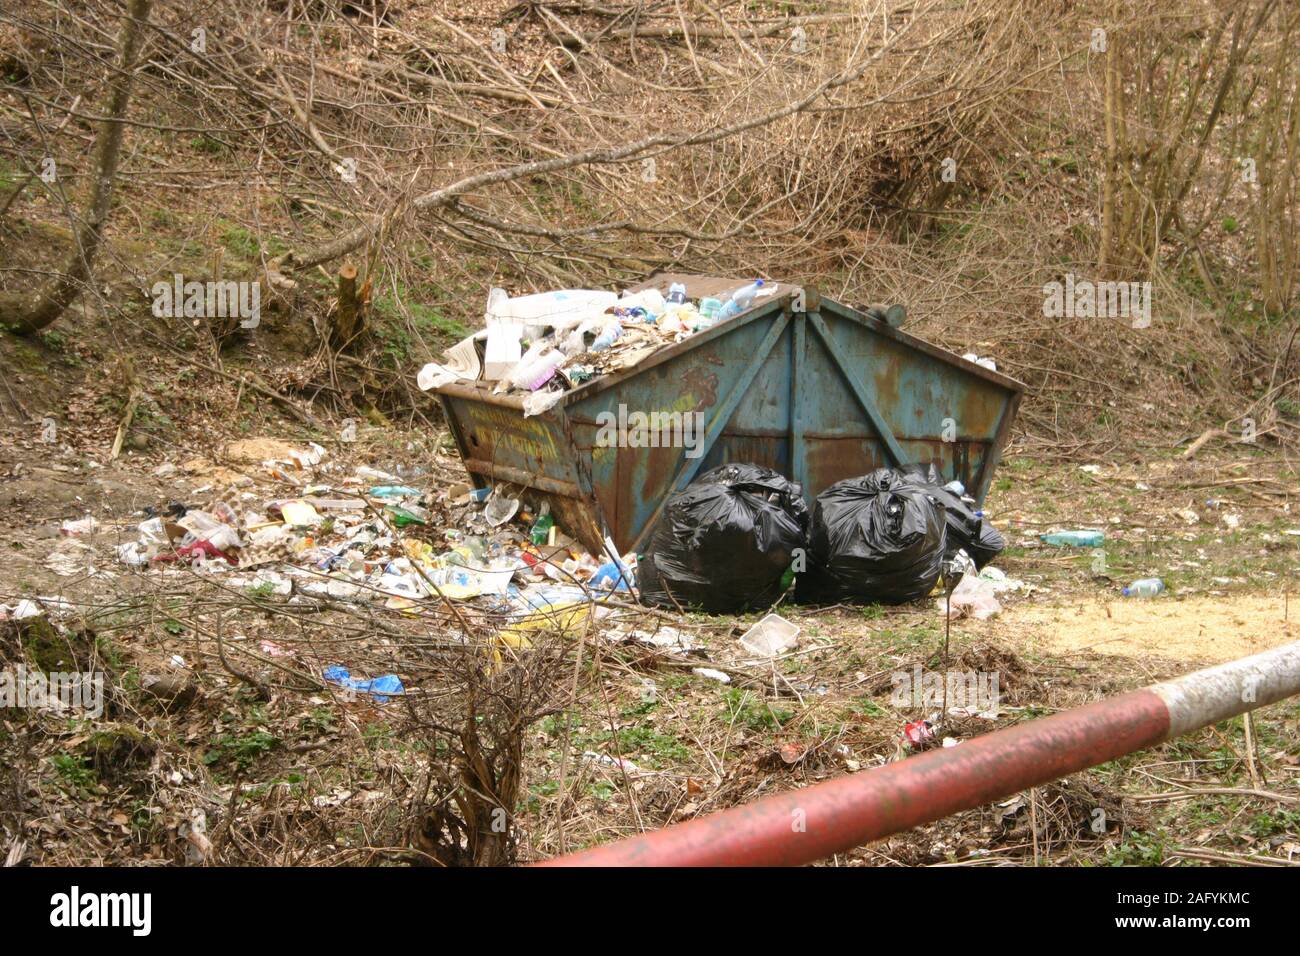 https://c8.alamy.com/comp/2AFYKMC/overfilled-trash-dumpster-in-romania-2AFYKMC.jpg